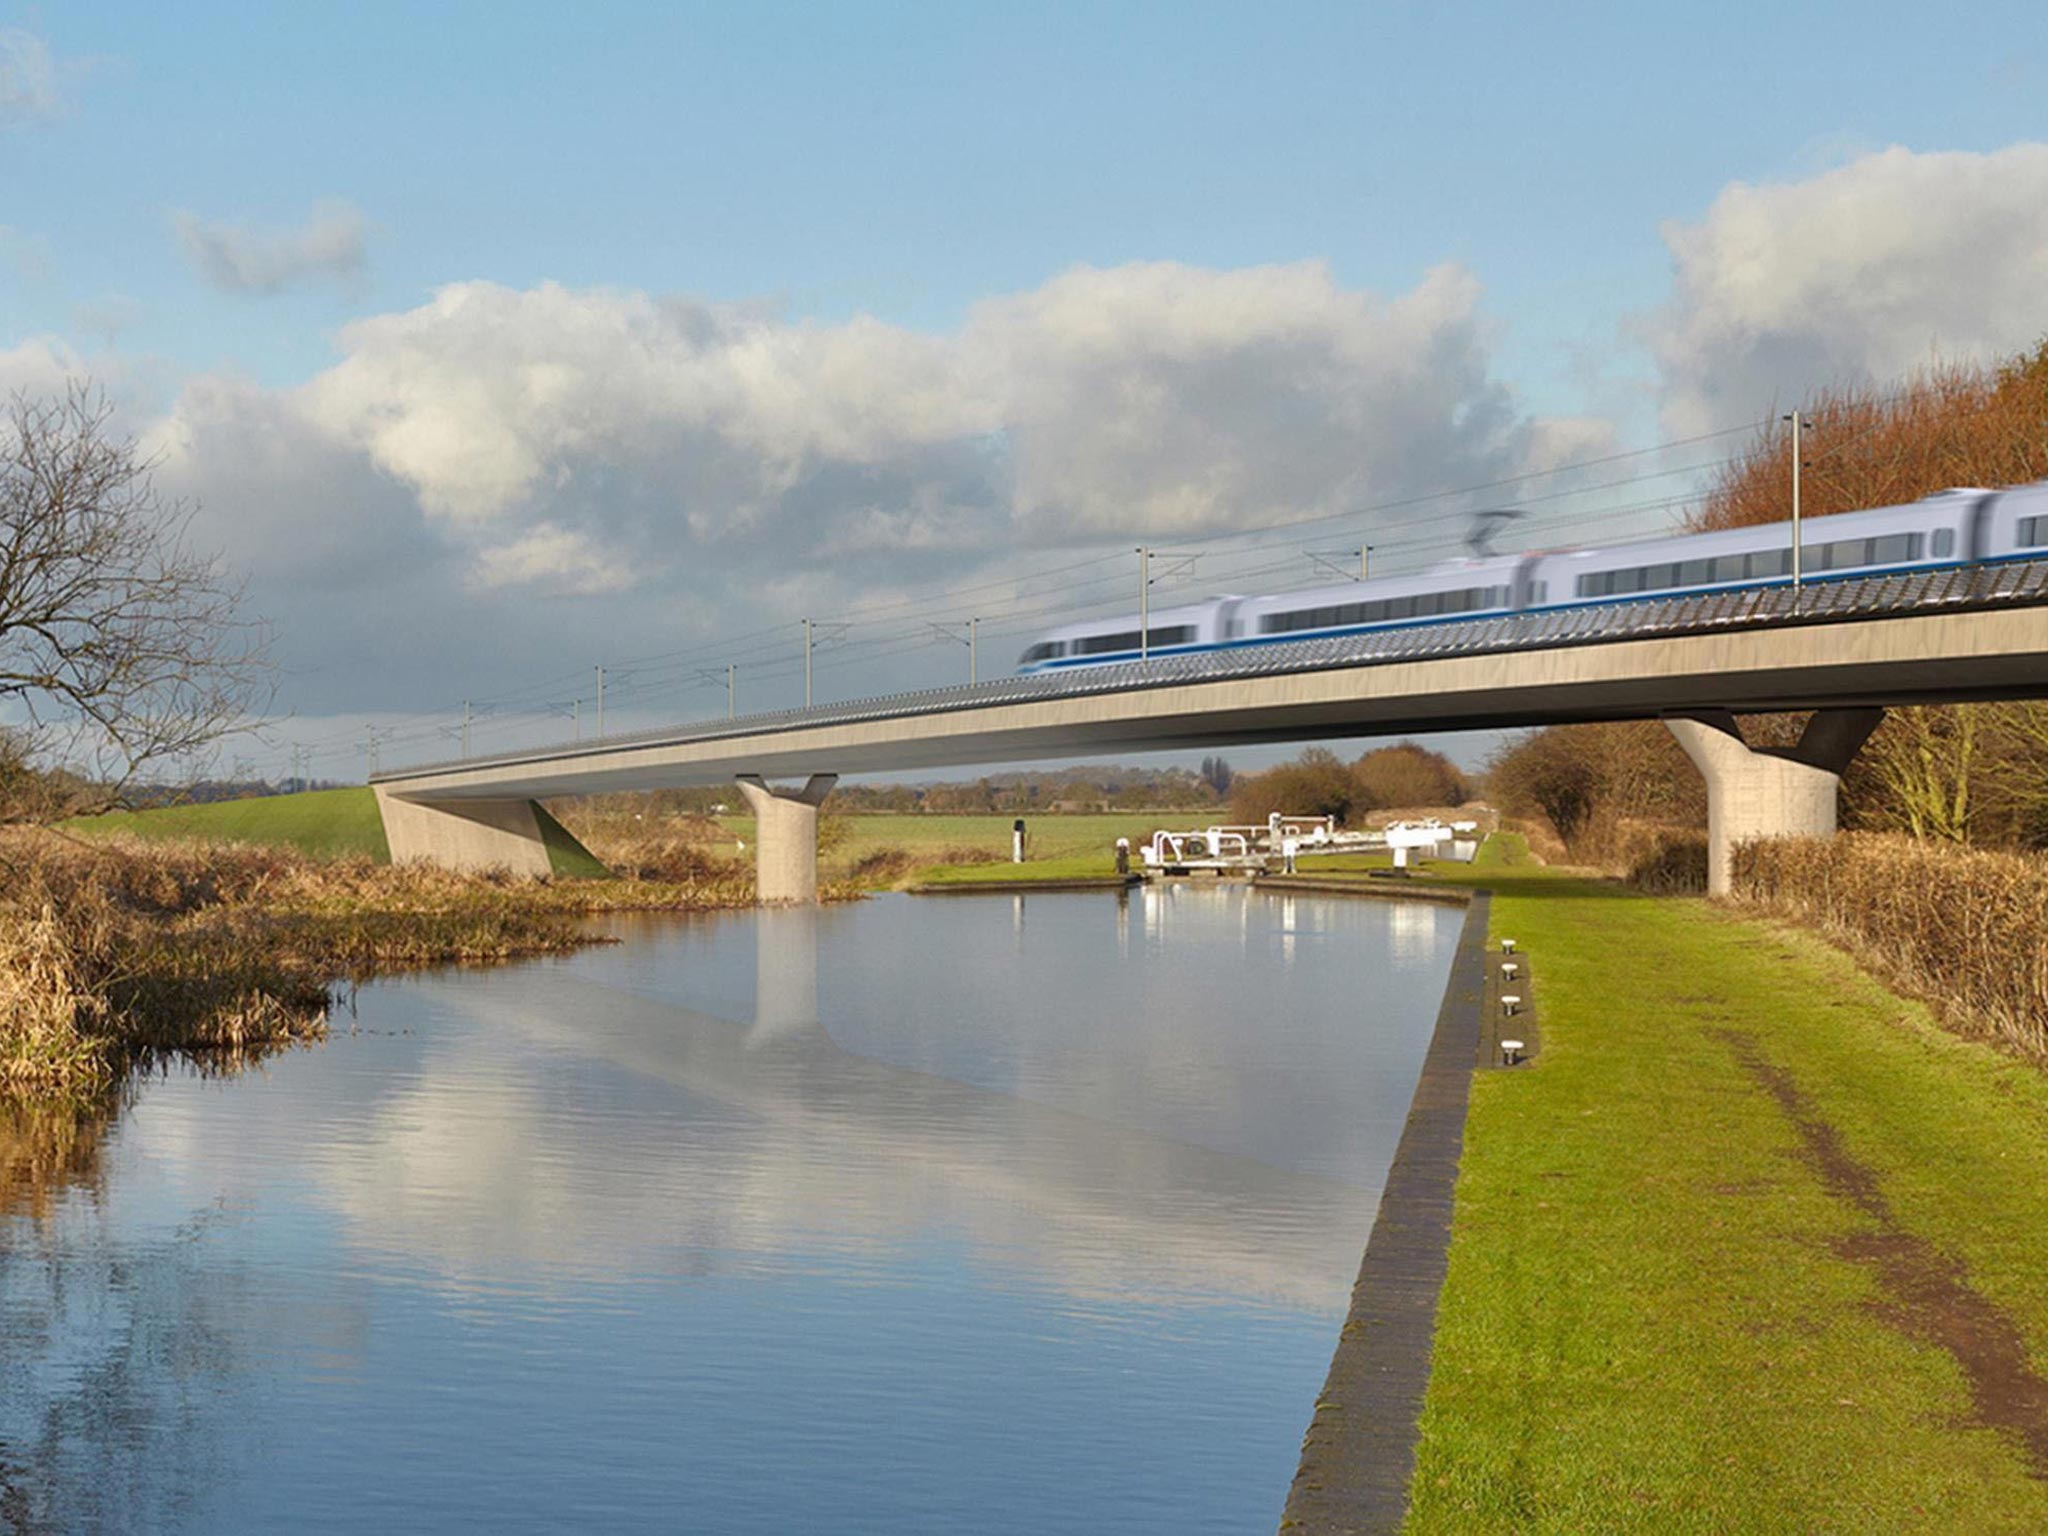 An artist's impression of an HS2 train on the Birmingham and Fazeley viaduct